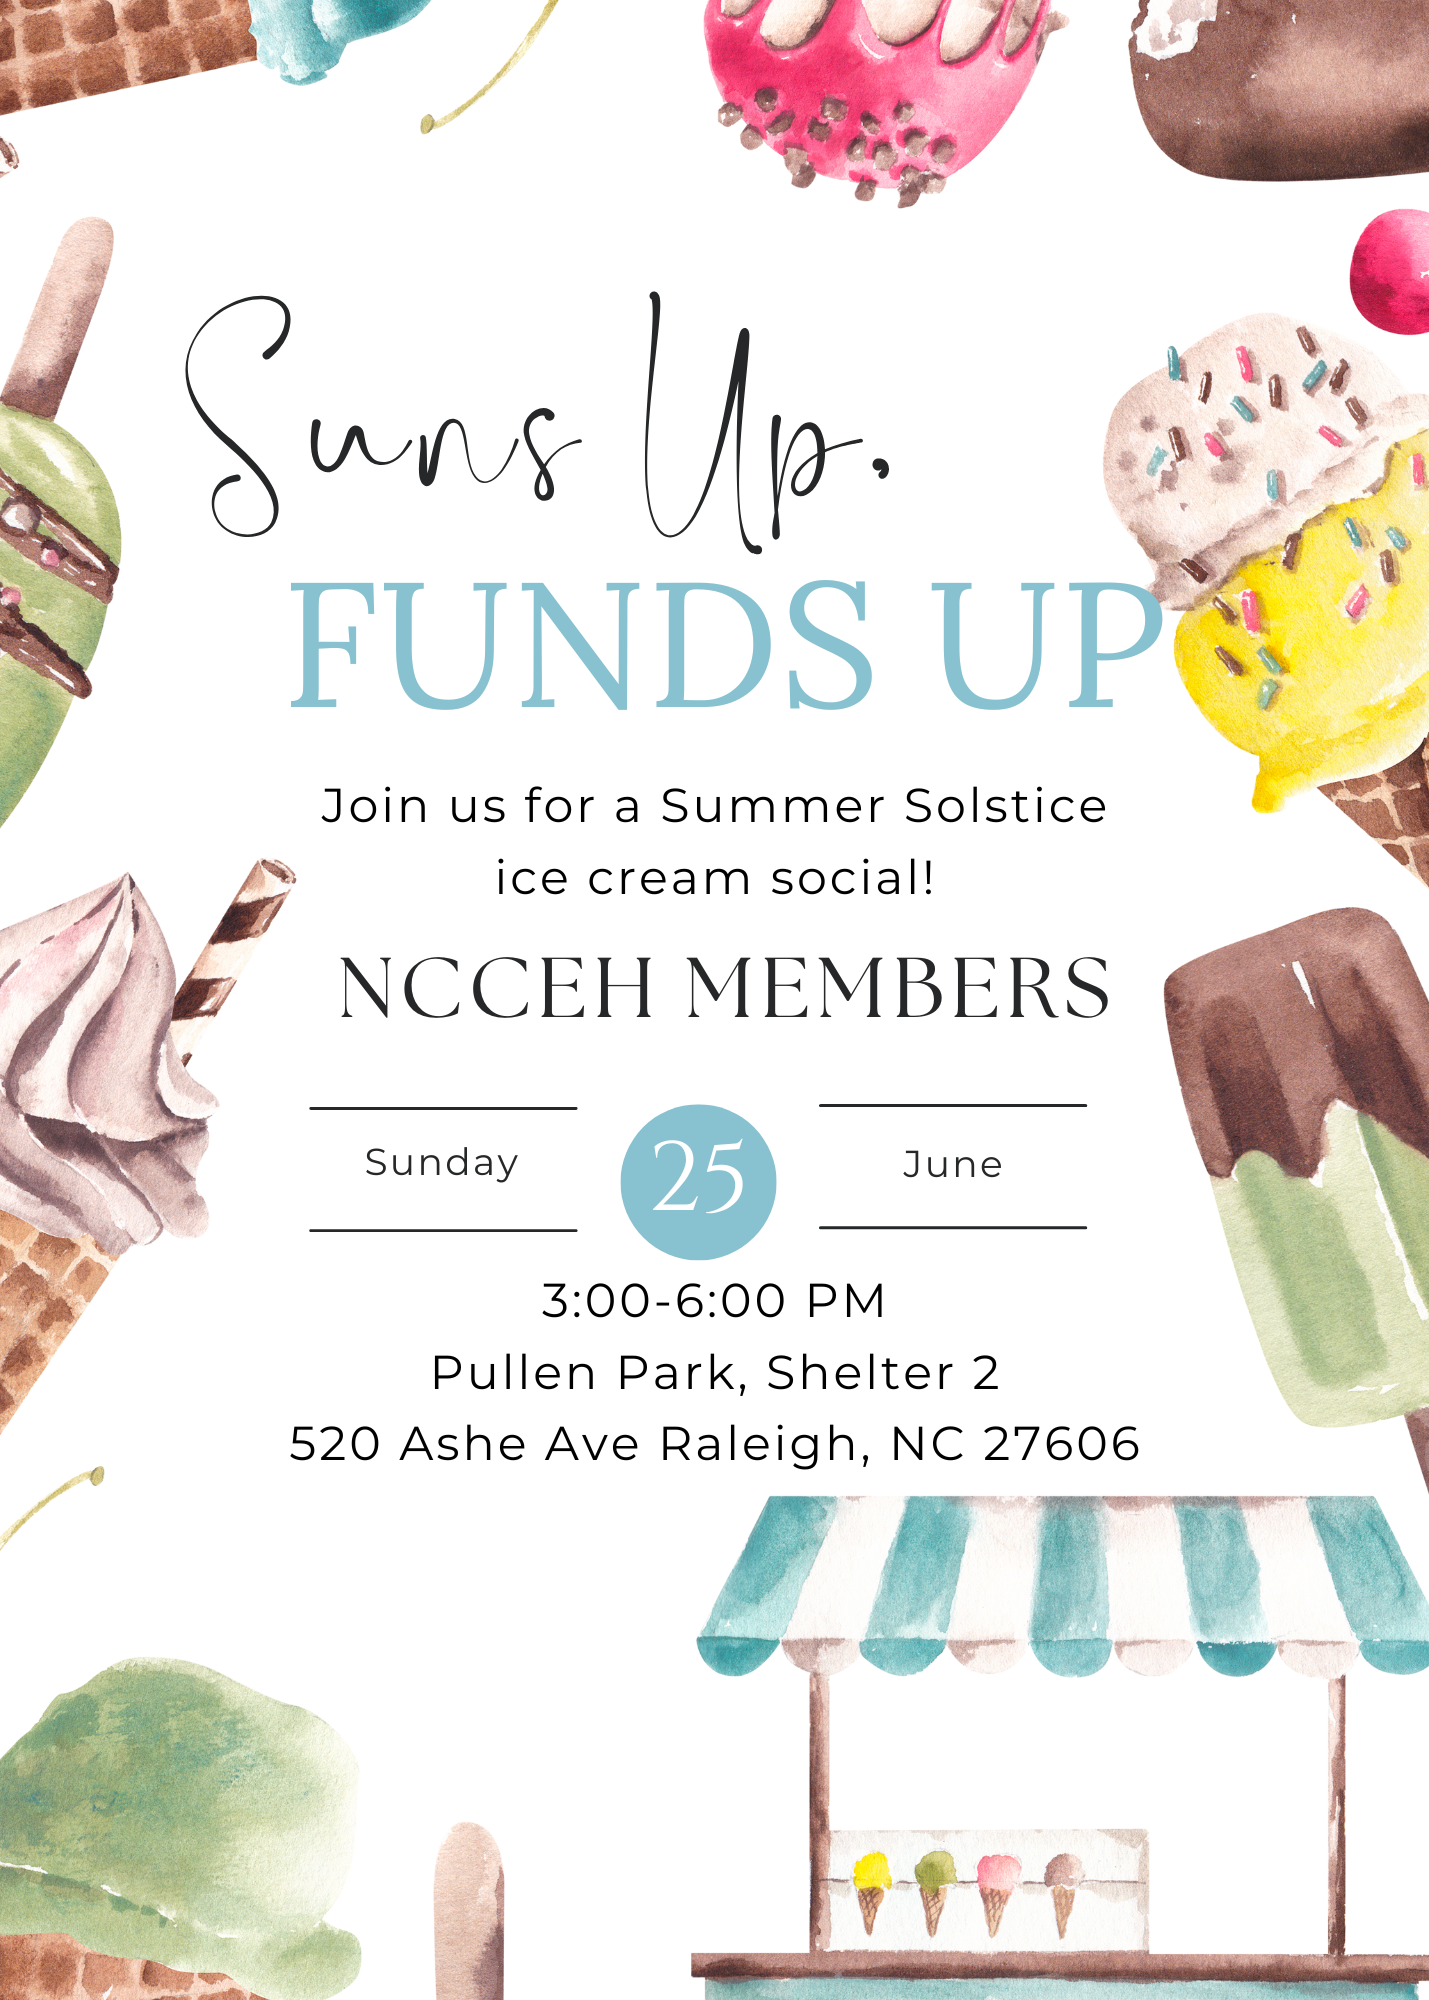 NCCEH Suns Up, Funds Up: Summer Solstice Ice Cream Social